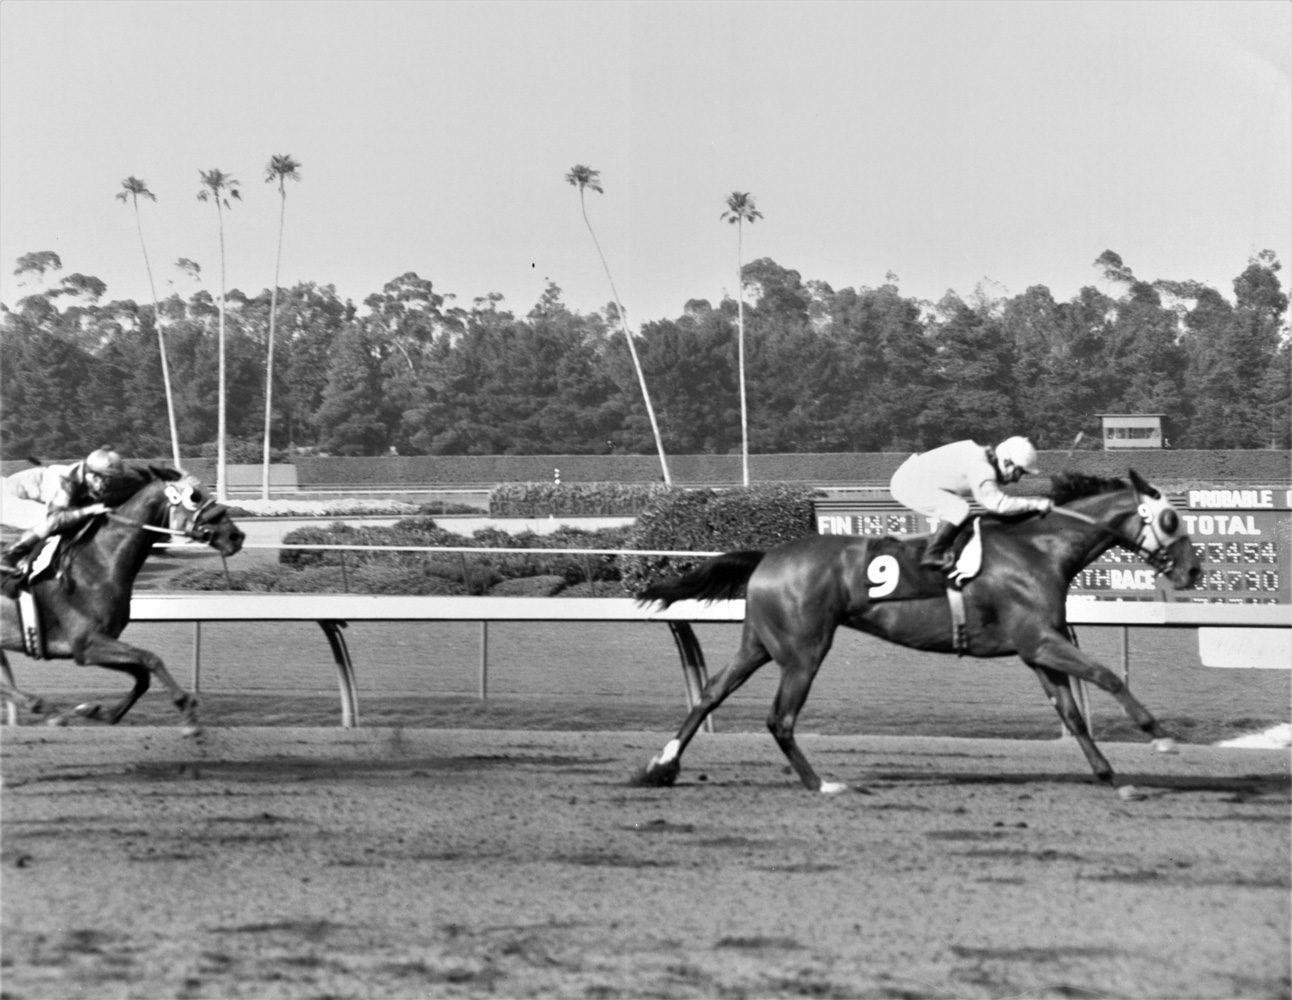 Gamely (Bill Shoemaker up) winning the 1967 Princess Stakes at Hollywood Park (Keeneland Library Thoroughbred Times Collection)